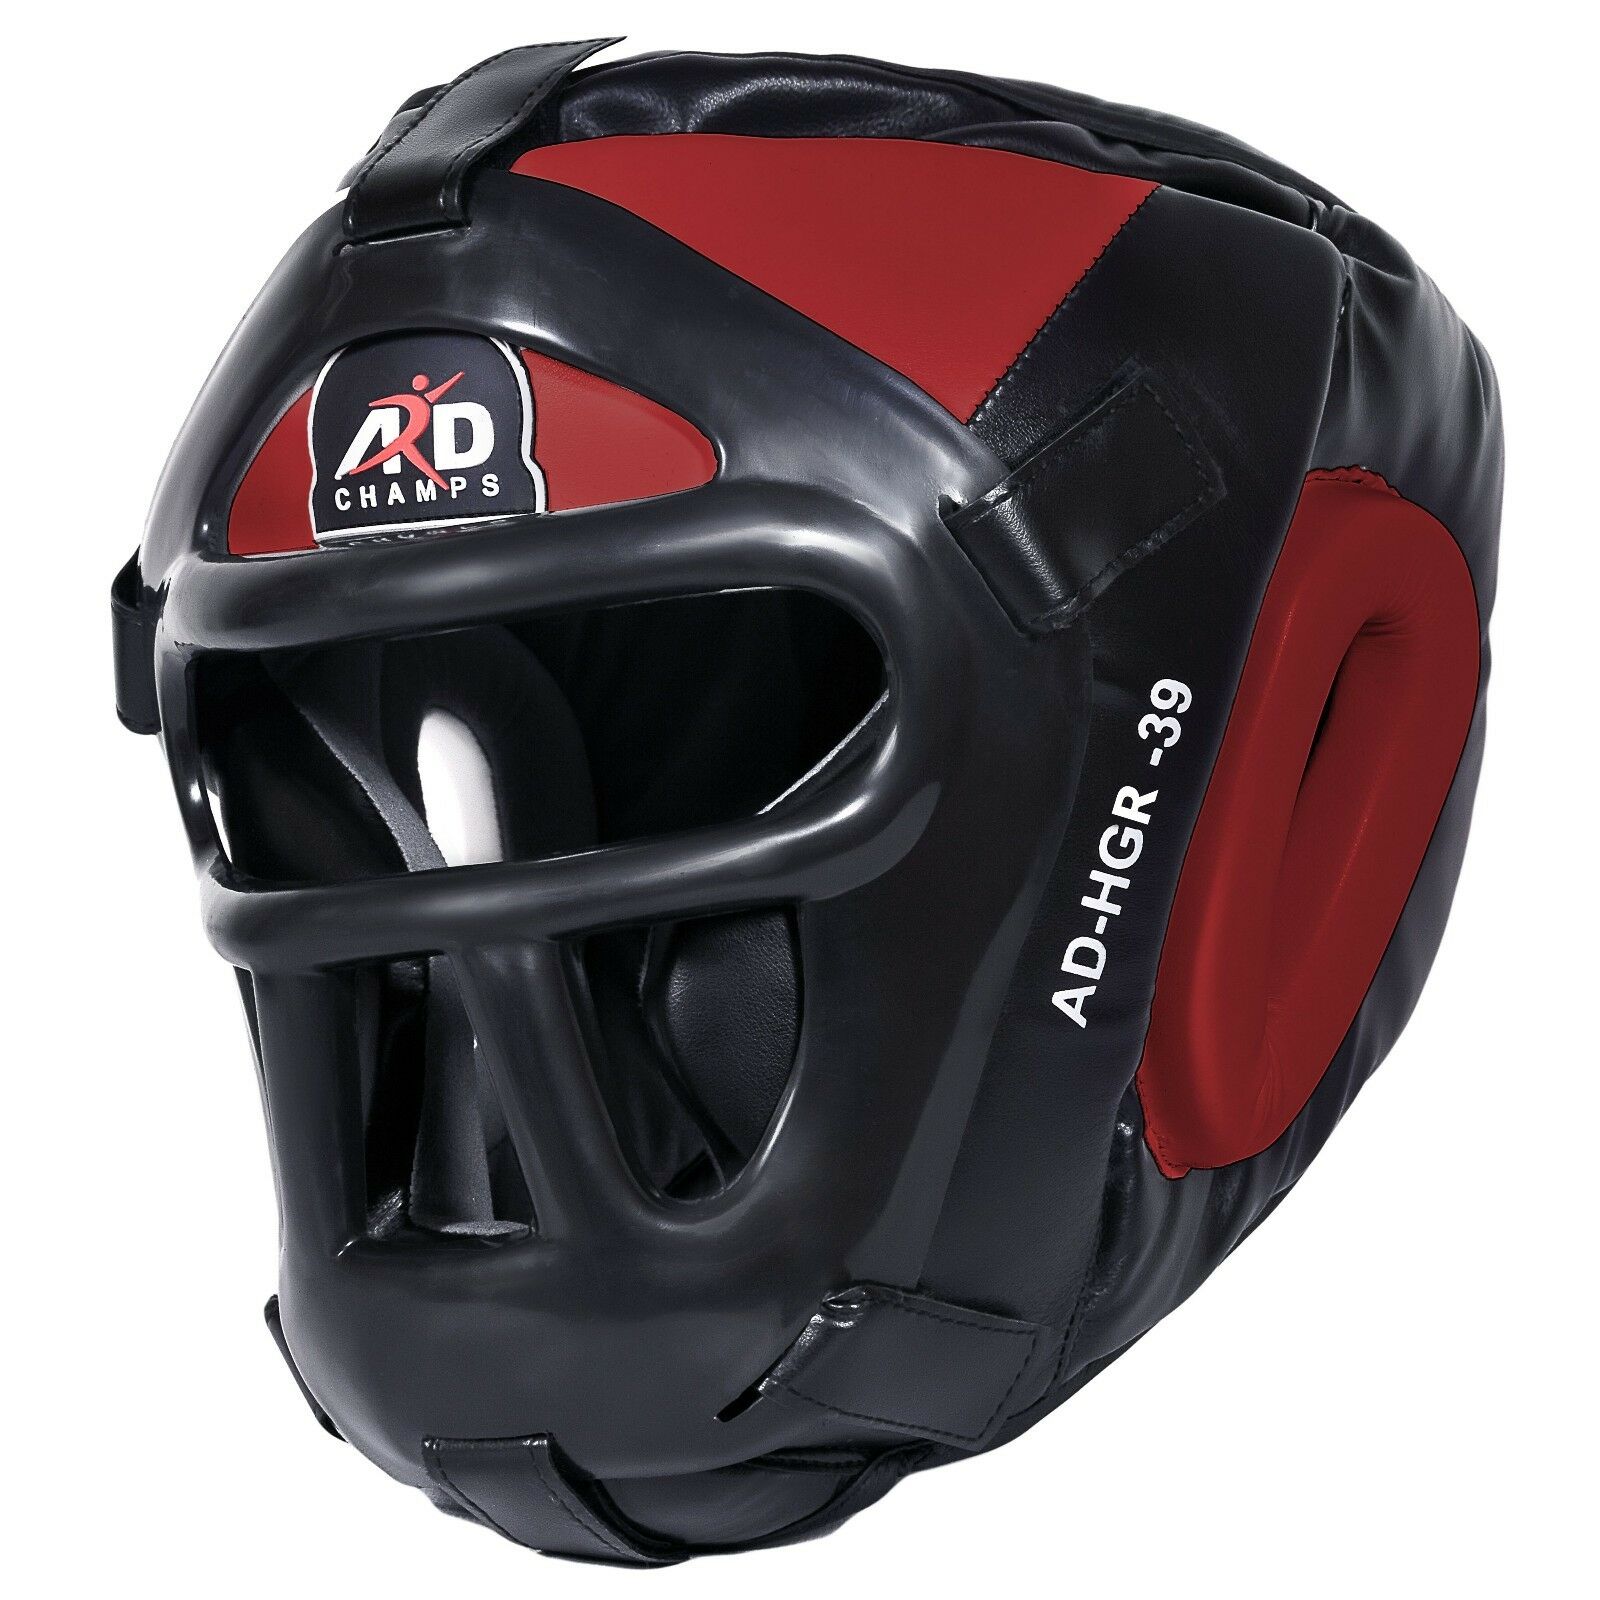 Ard Champs™ Protector Guard Wrestling Helmet Head Gear Boxing Mma Ufc Rugby- Red